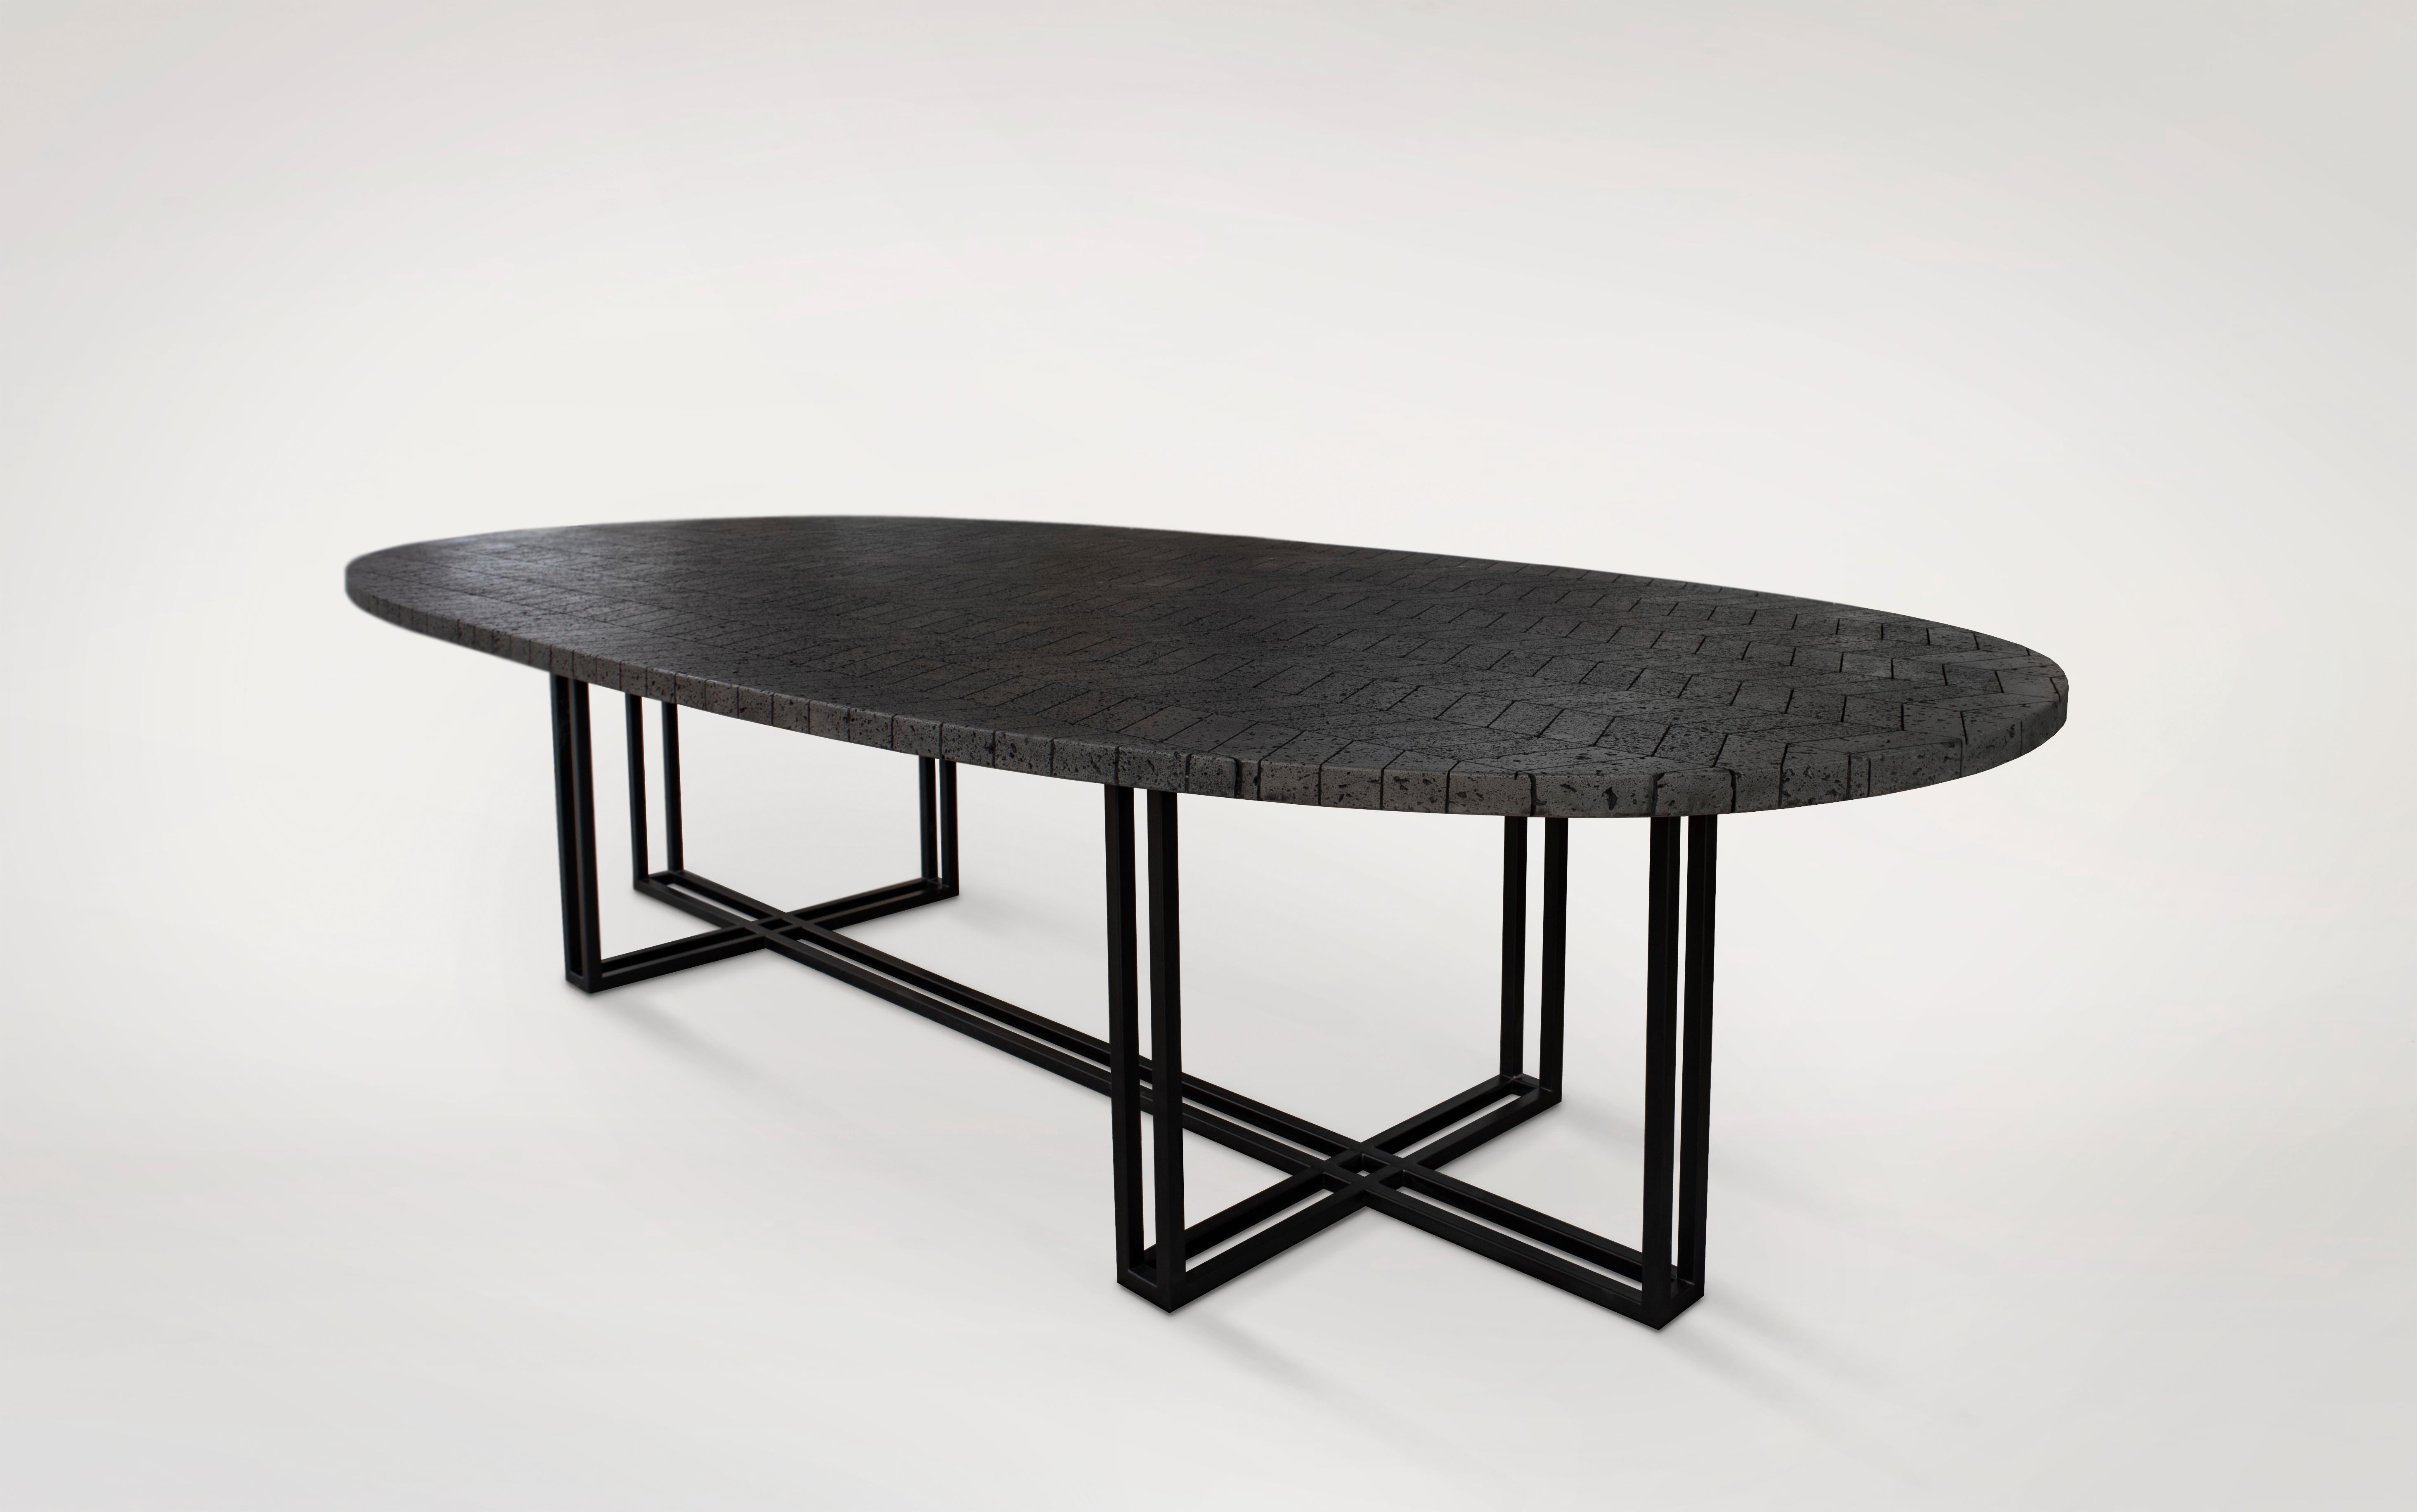 The vast volcanic stone stretches across a 330 x 150 cm oval top featuring a composition of hand-cut, polished and mounted pieces. The metal base provides character and strength. The large-format Lava table is ideal for adding its energetic feel to